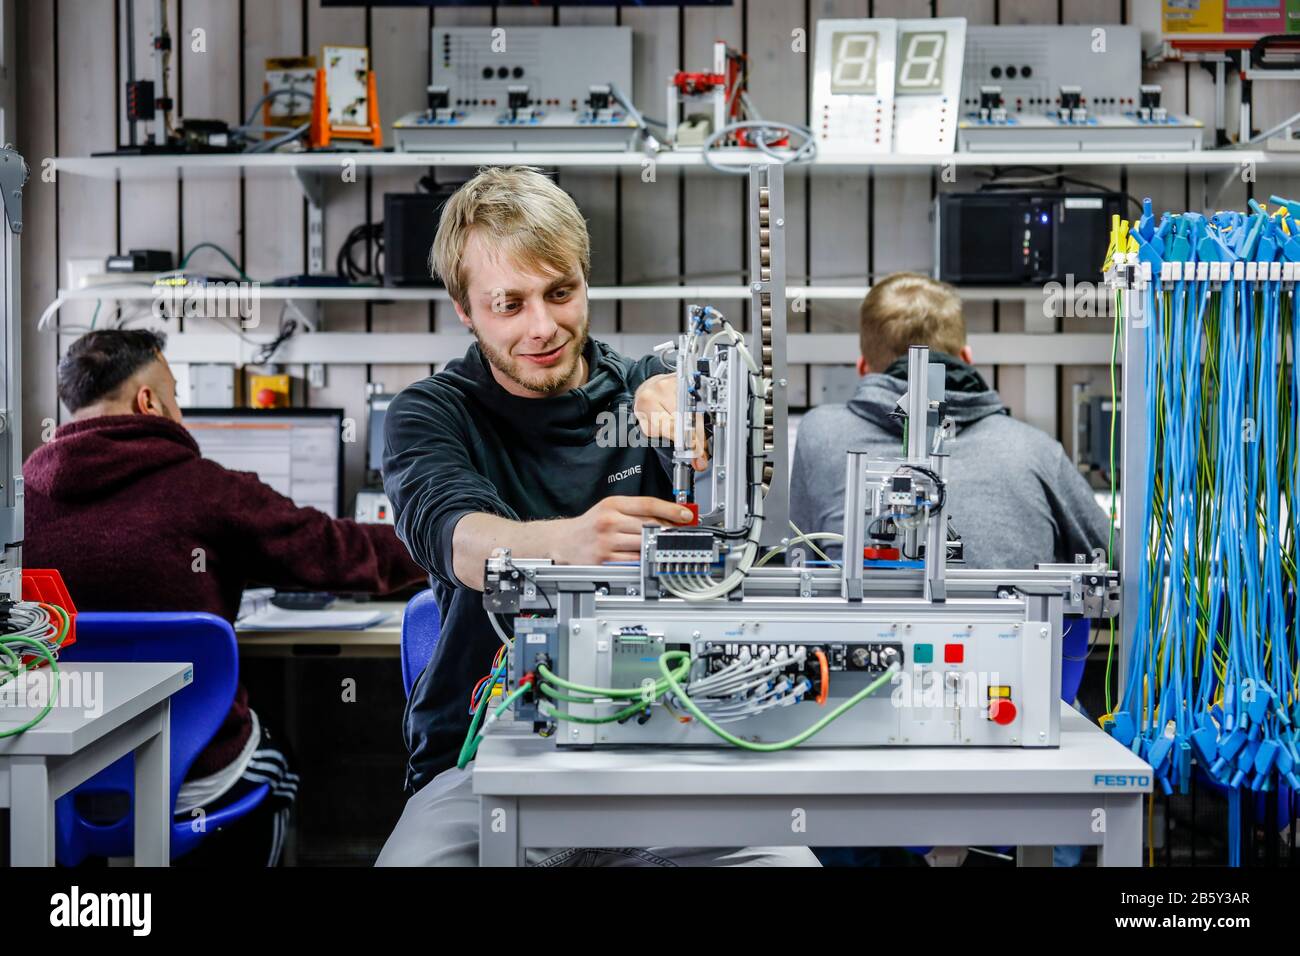 Remscheid, North Rhine-Westphalia, Germany - Trainees in metal and electrical professions, an industrial mechanic assembles an electro-pneumatic syste Stock Photo